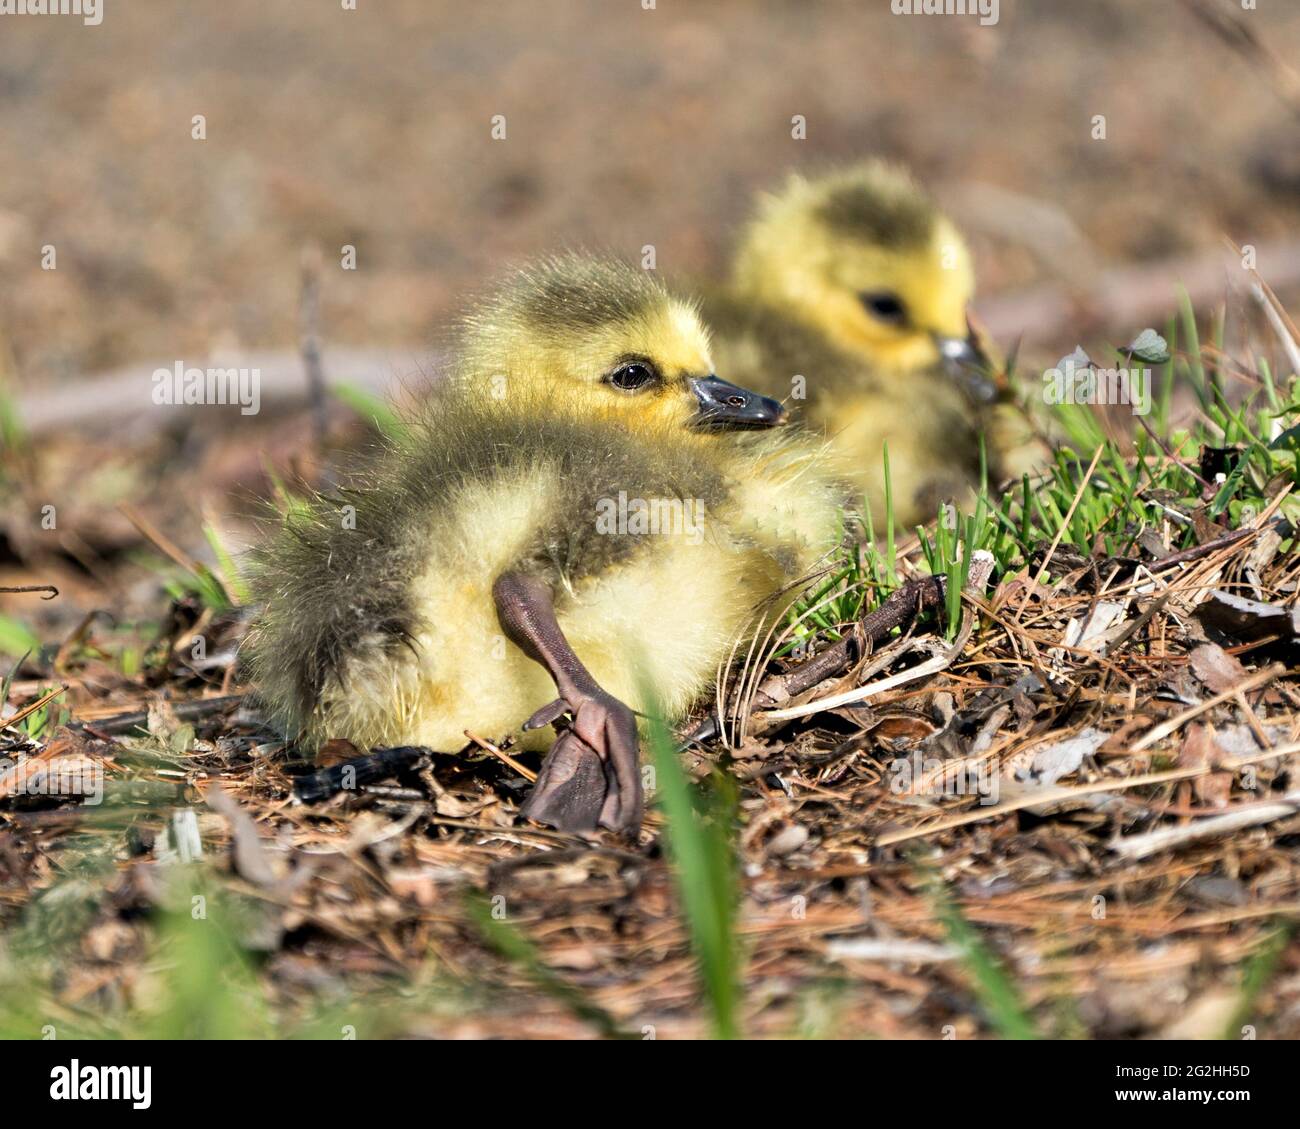 Canadian babies gosling close-up profile view resting on grass in their environment and habitat. Canada Goose Image. Picture. Portrait. Photo. Stock Photo